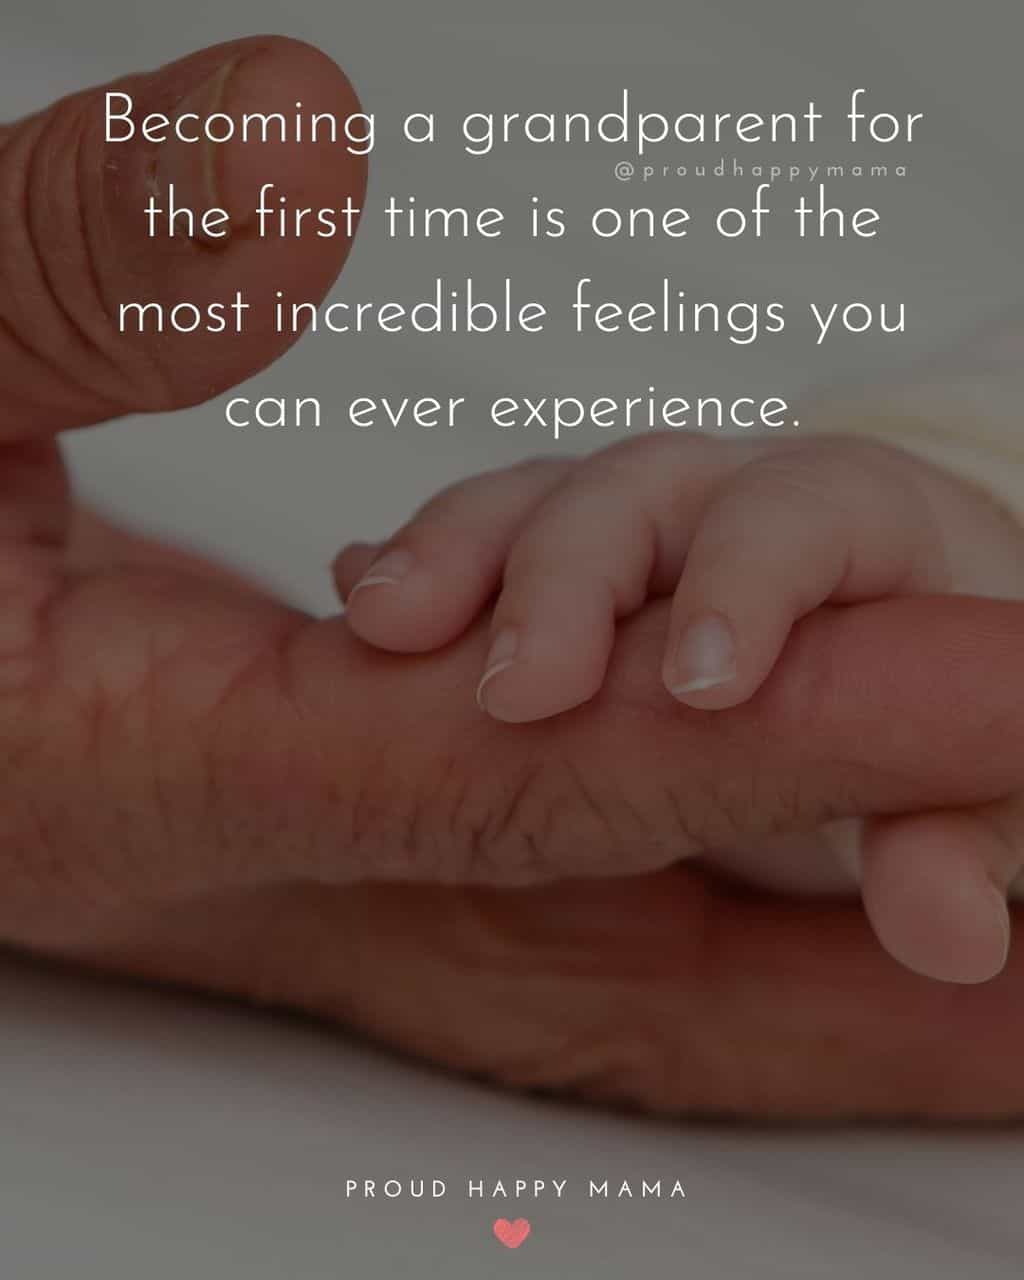 Grandparent Quotes – Becoming a grandparent for the first time is one of the most incredible feelings you can ever experience.’